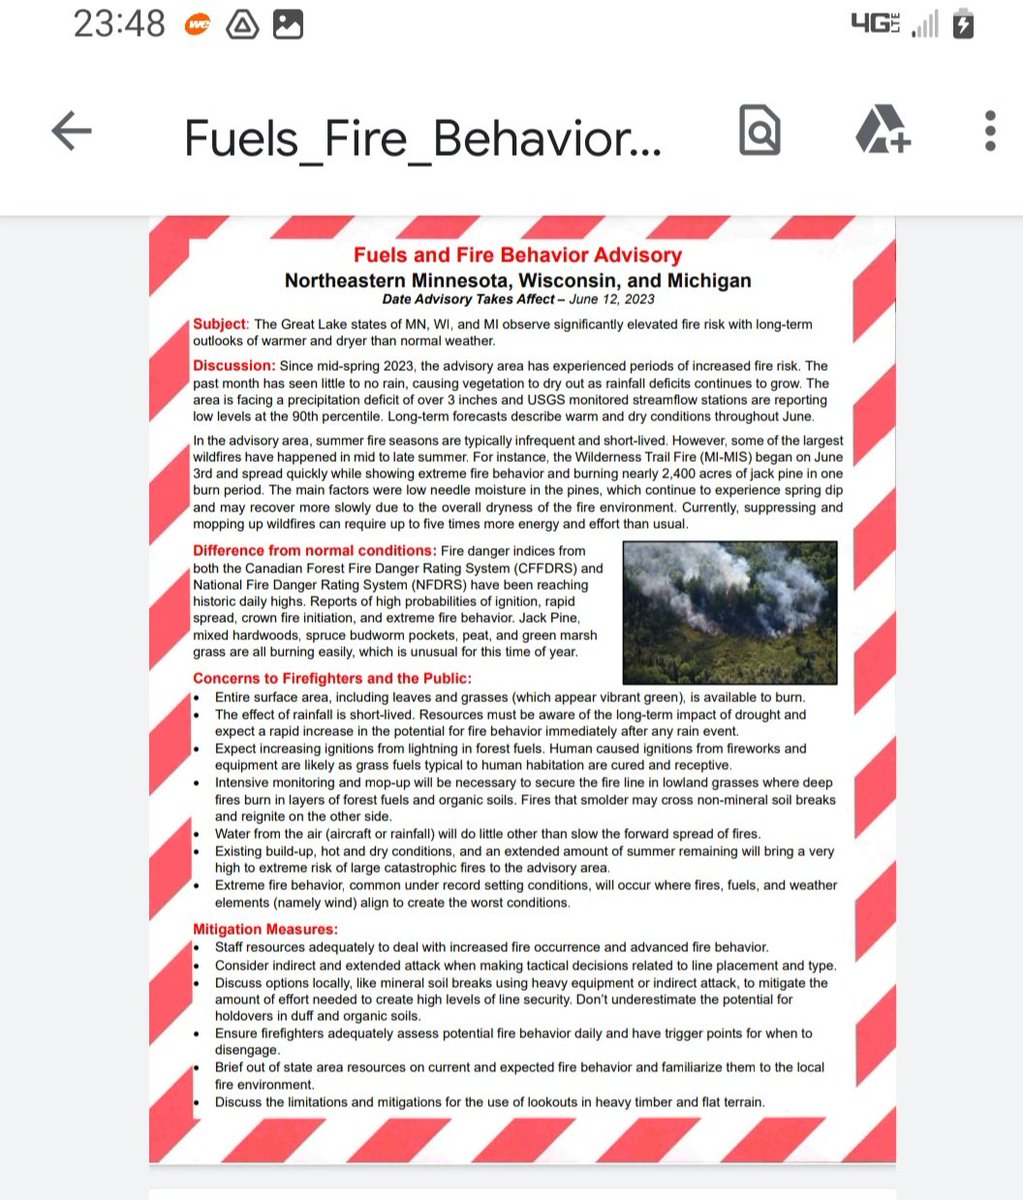 A Fuels and Fire Behavior Advisory for Northeastern Minnesota, Wisconsin and Michigan – effective June 12, 2023, has been released due to the significantly elevated fire risk with long-term outlooks of warmer and dyer than normal weather forecast. https://t.co/NSNN4dsAXm